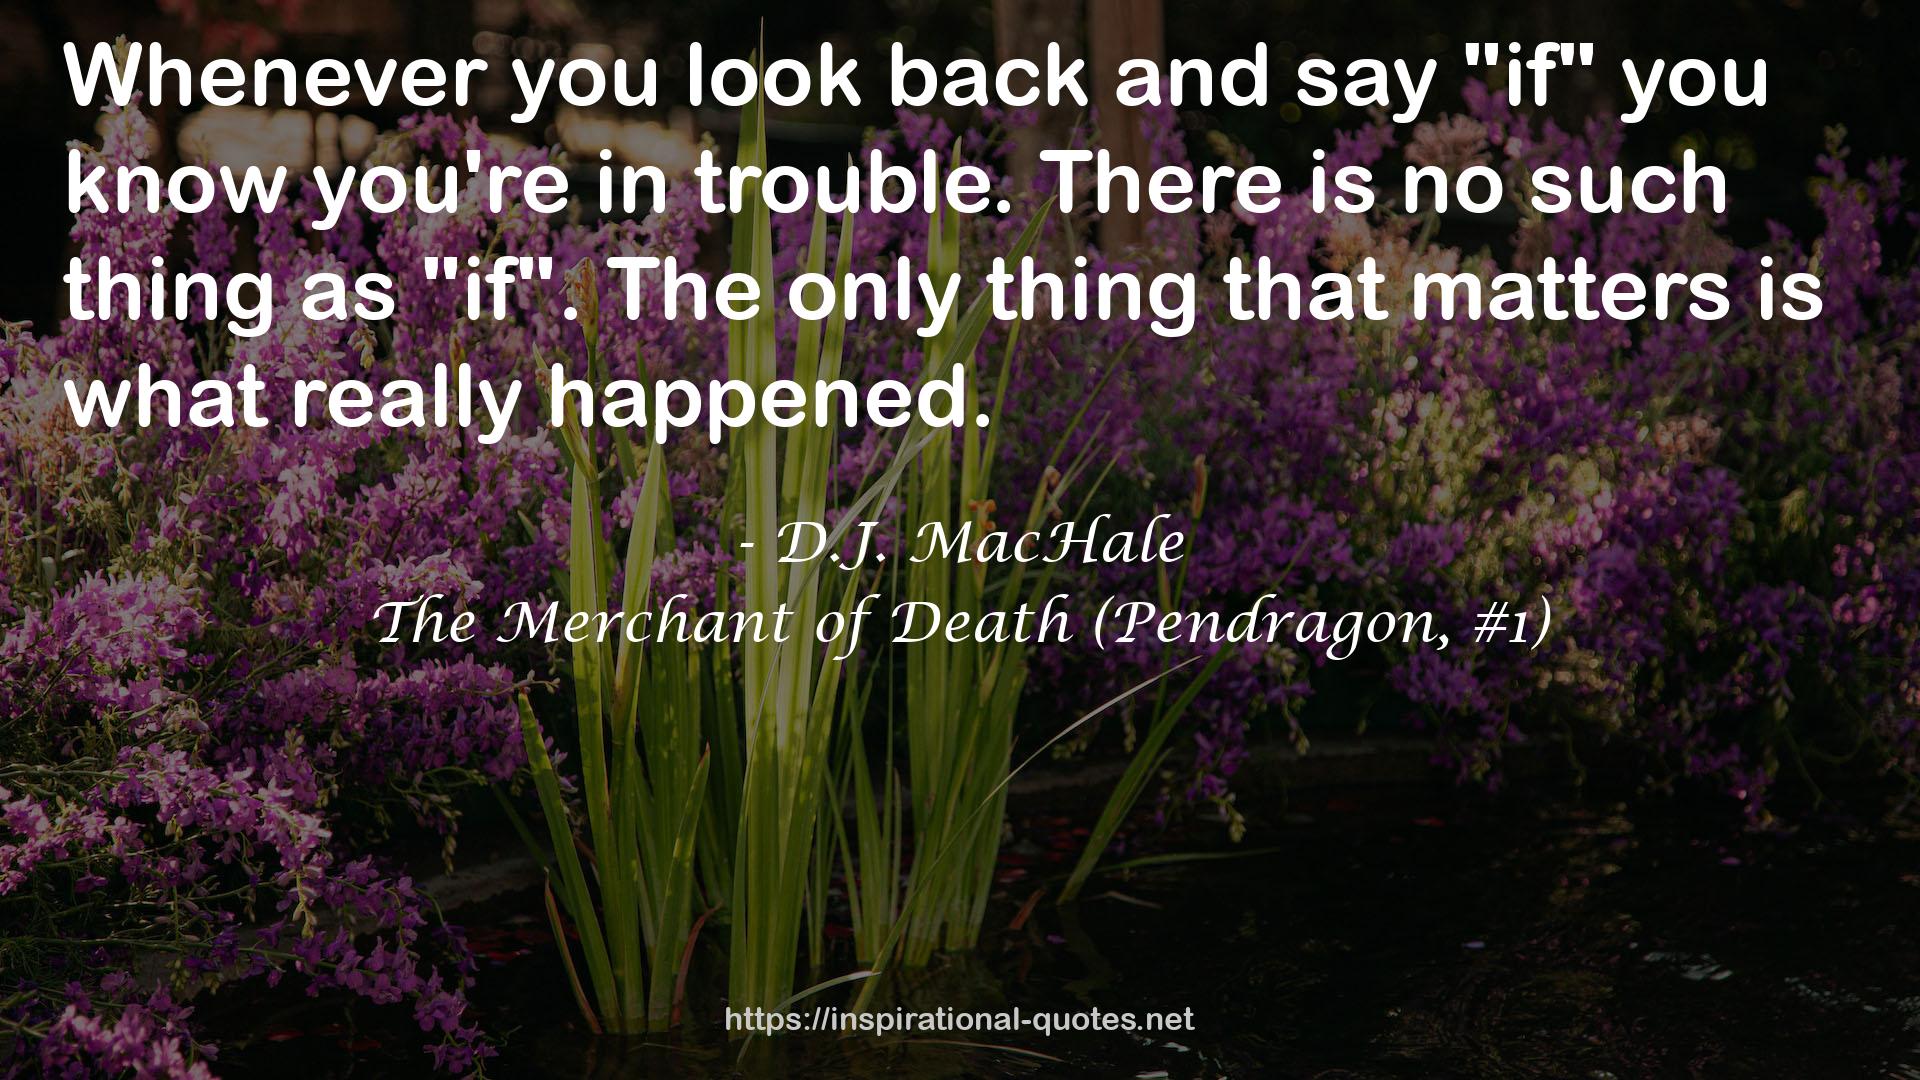 The Merchant of Death (Pendragon, #1) QUOTES